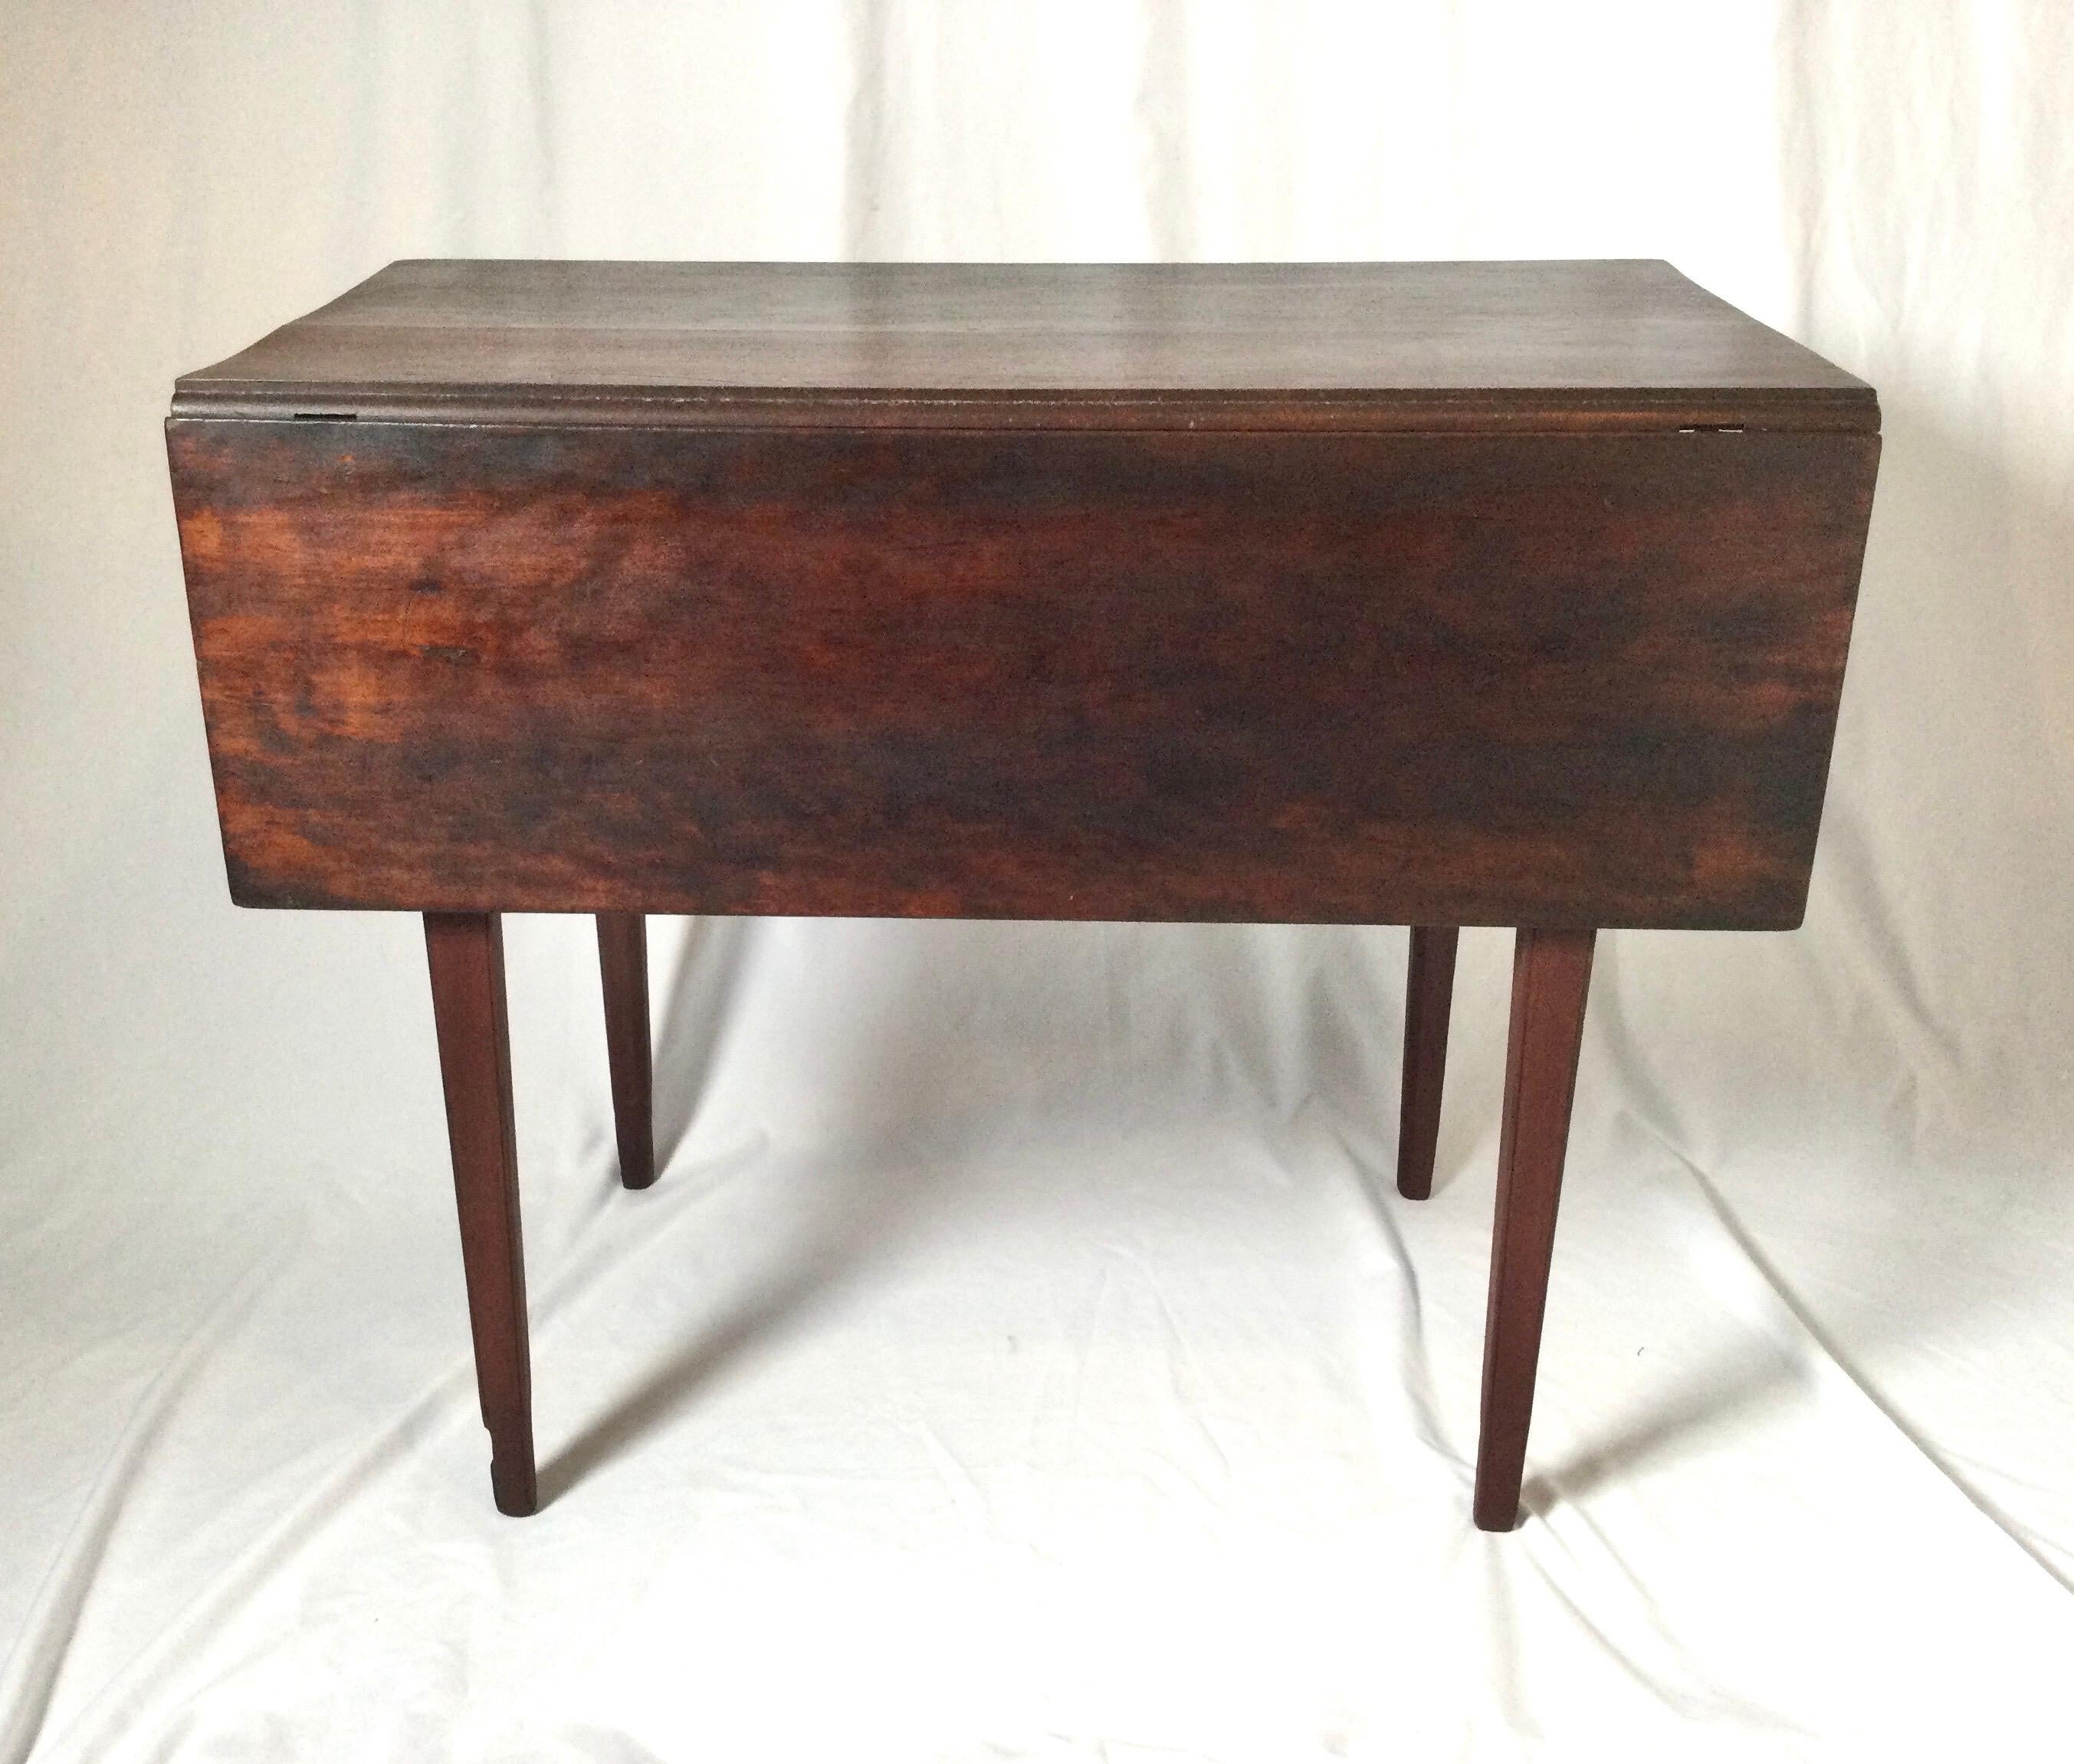 Early 19th Century Cherry Pembroke Drop Leaf Table In Good Condition For Sale In Lambertville, NJ